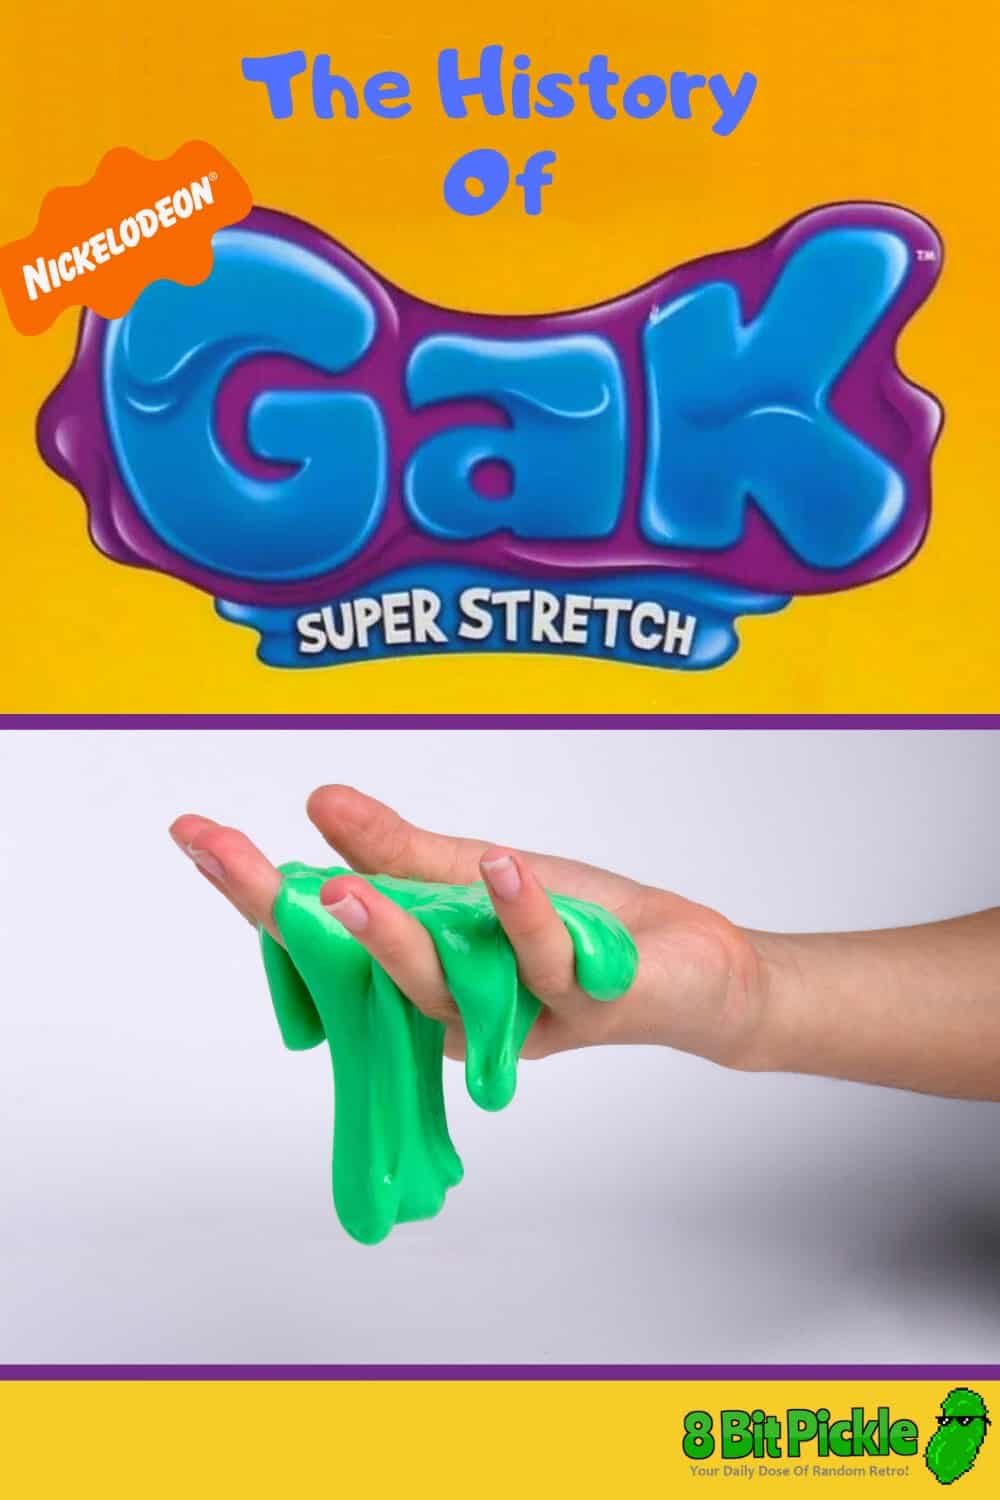 Nickelodeon Gak the slime toy designed by Mattel